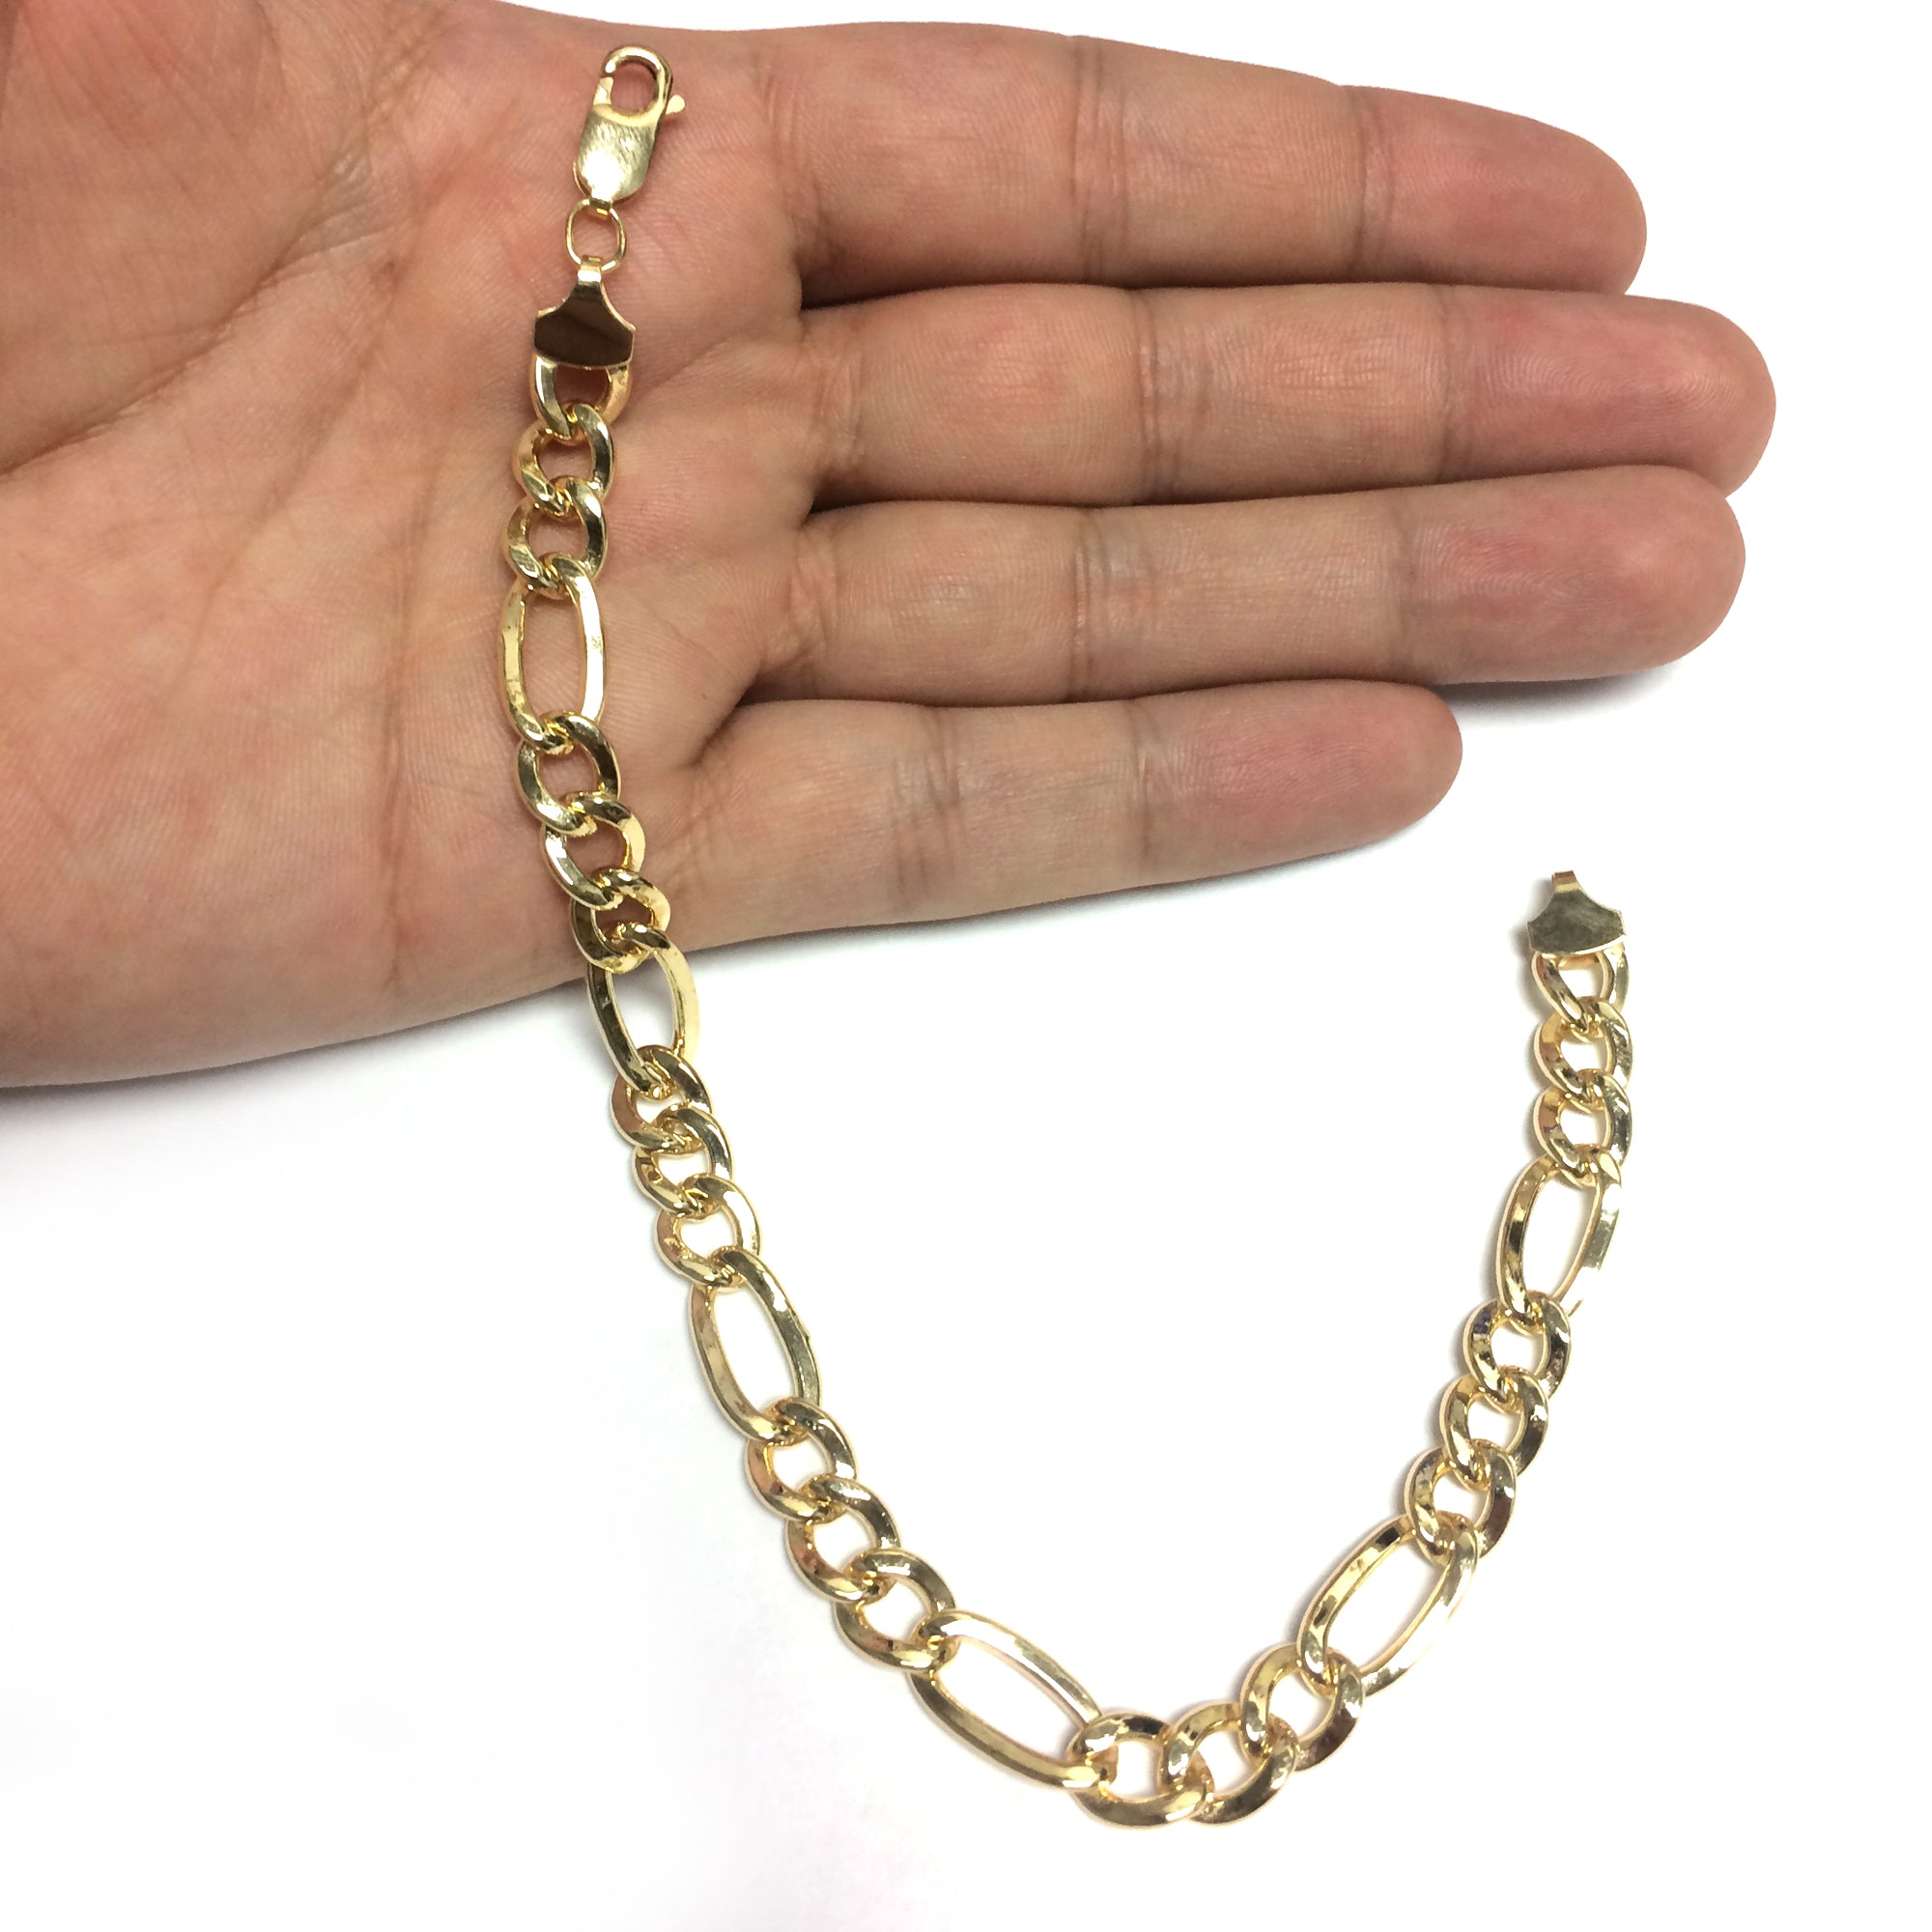 14K Yellow Gold Filled Solid Figaro Chain Bracelet, 7.8 mm, 9" fine designer jewelry for men and women